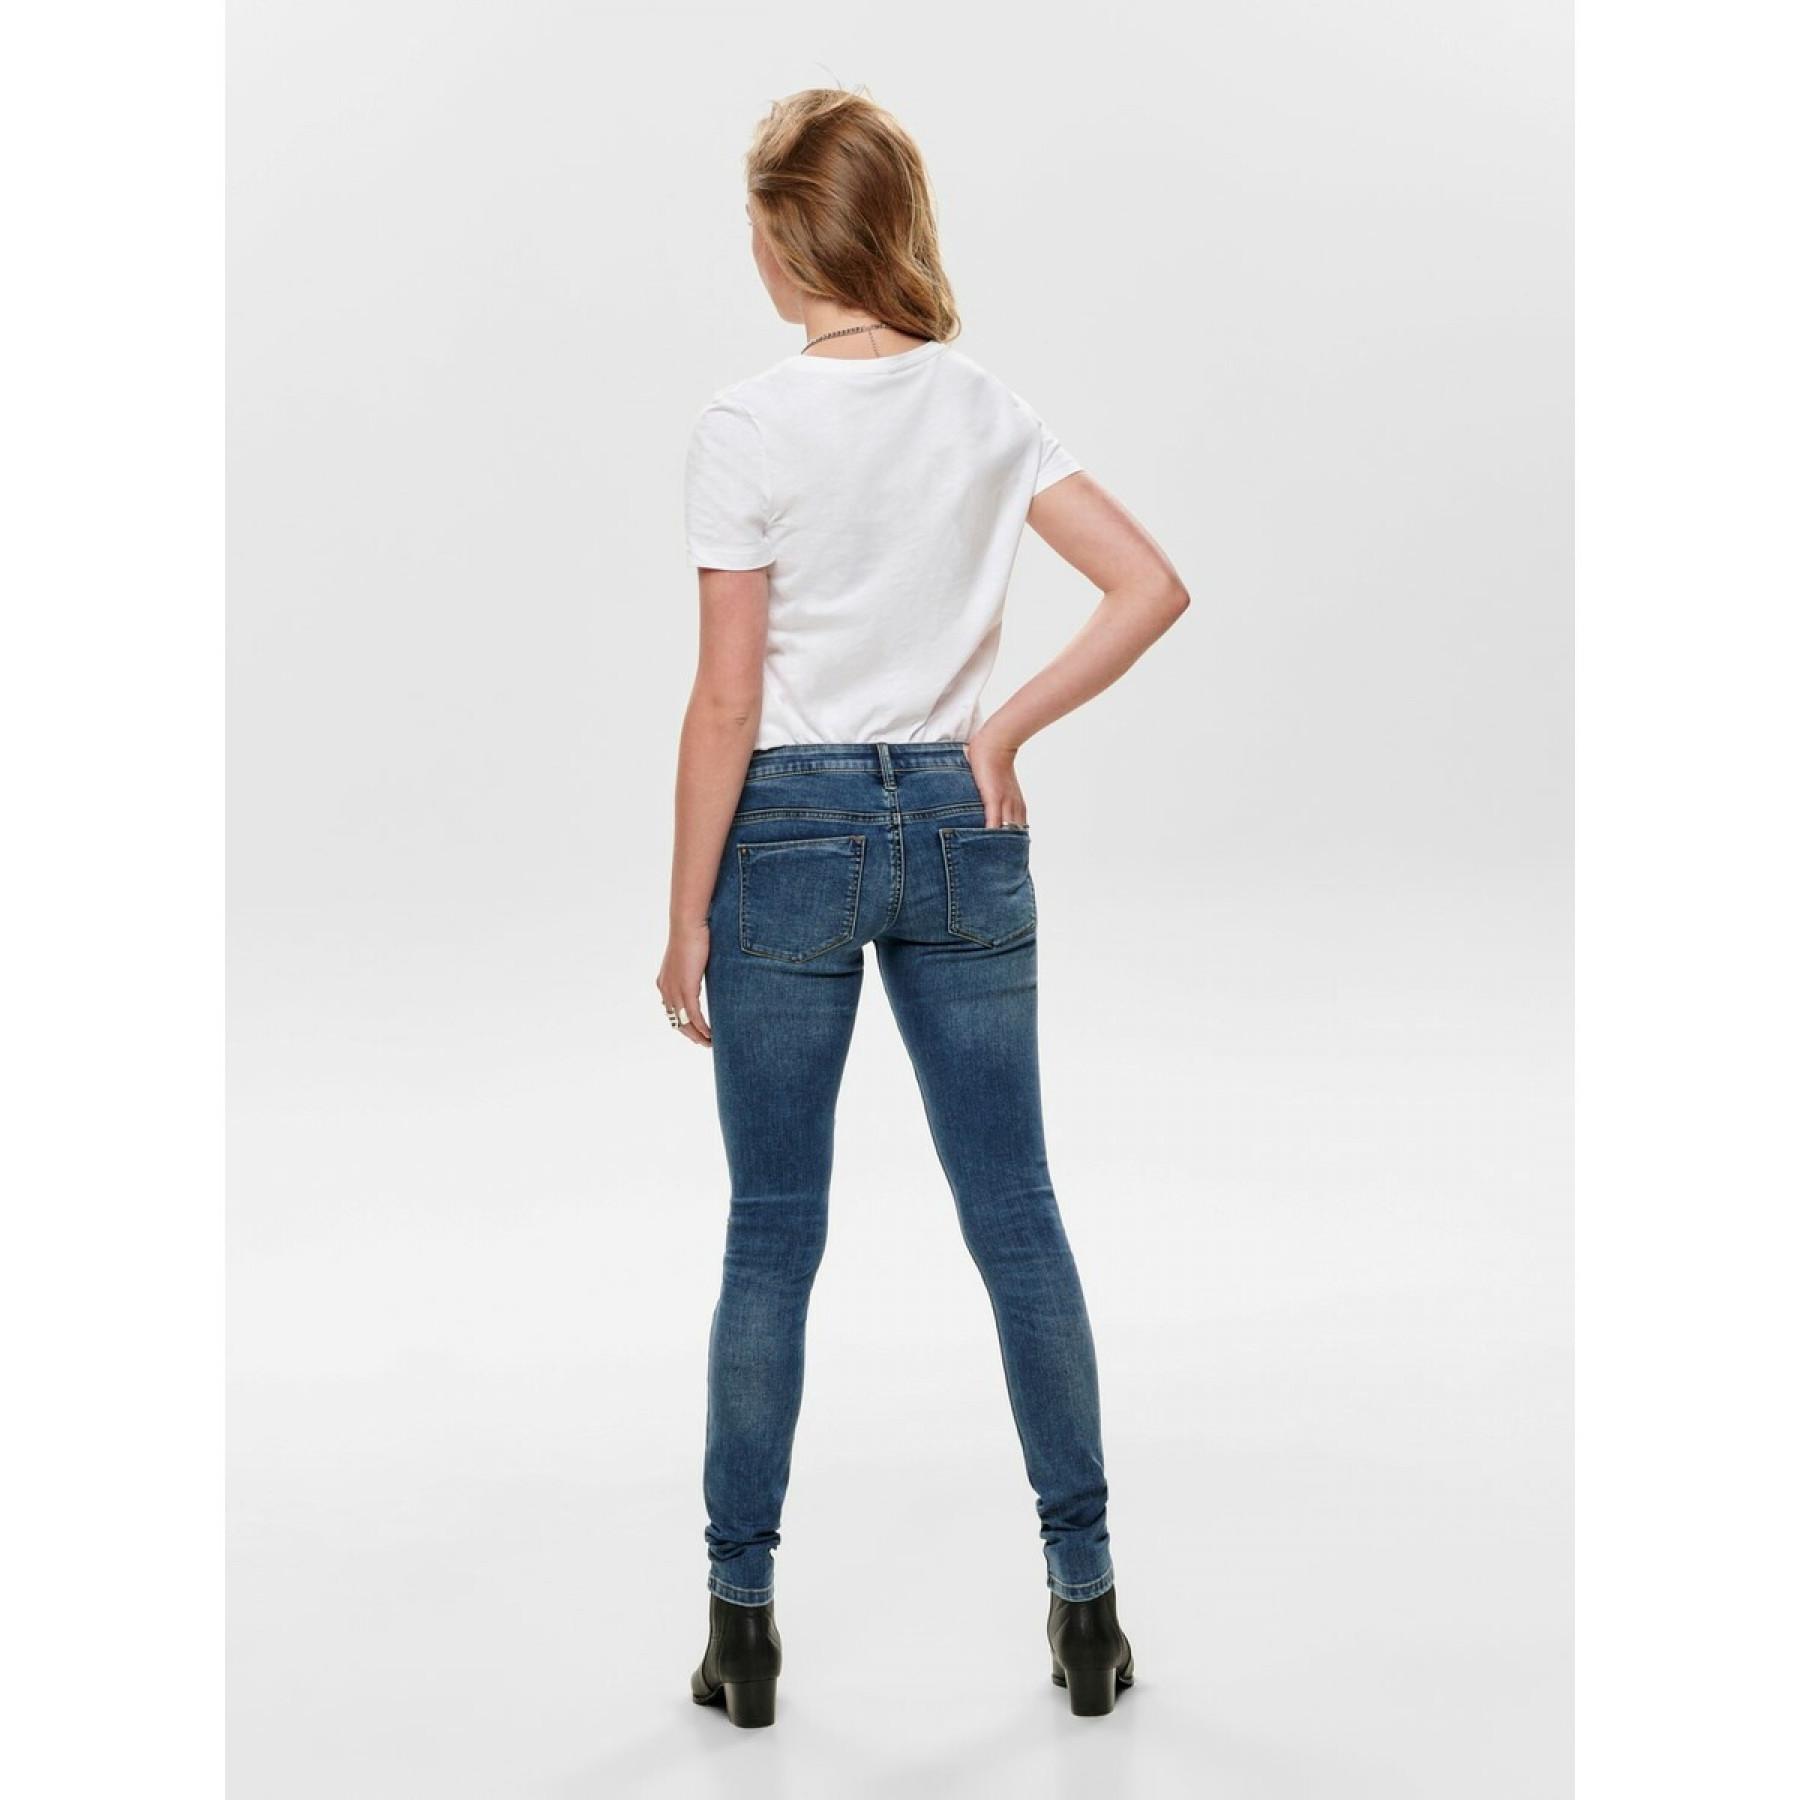 Jeans femme Only Coral life